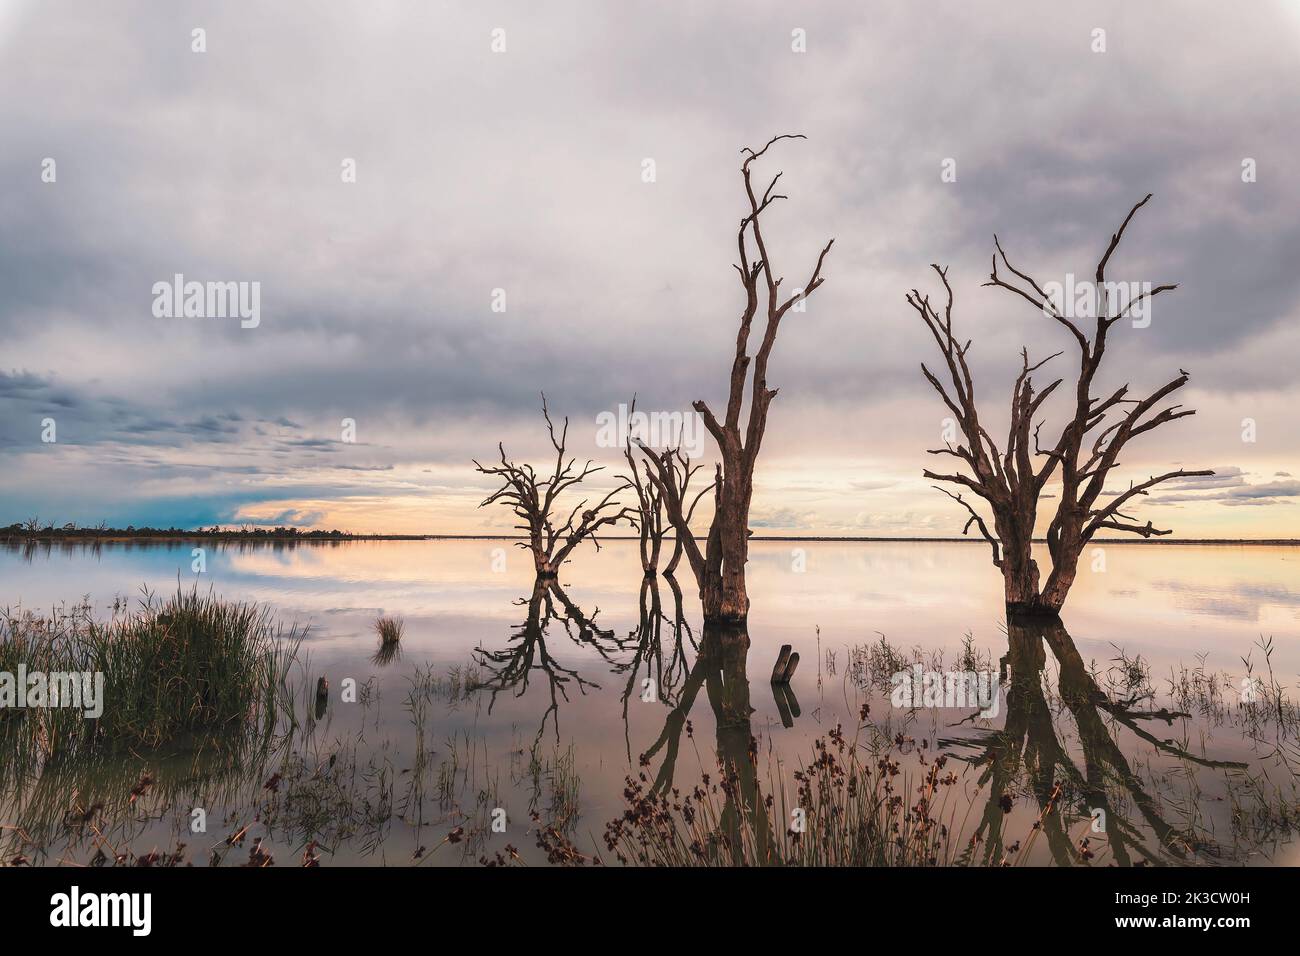 Lake Bonney dead trees popping out of the water at dusk, Barmera, South Australia Stock Photo